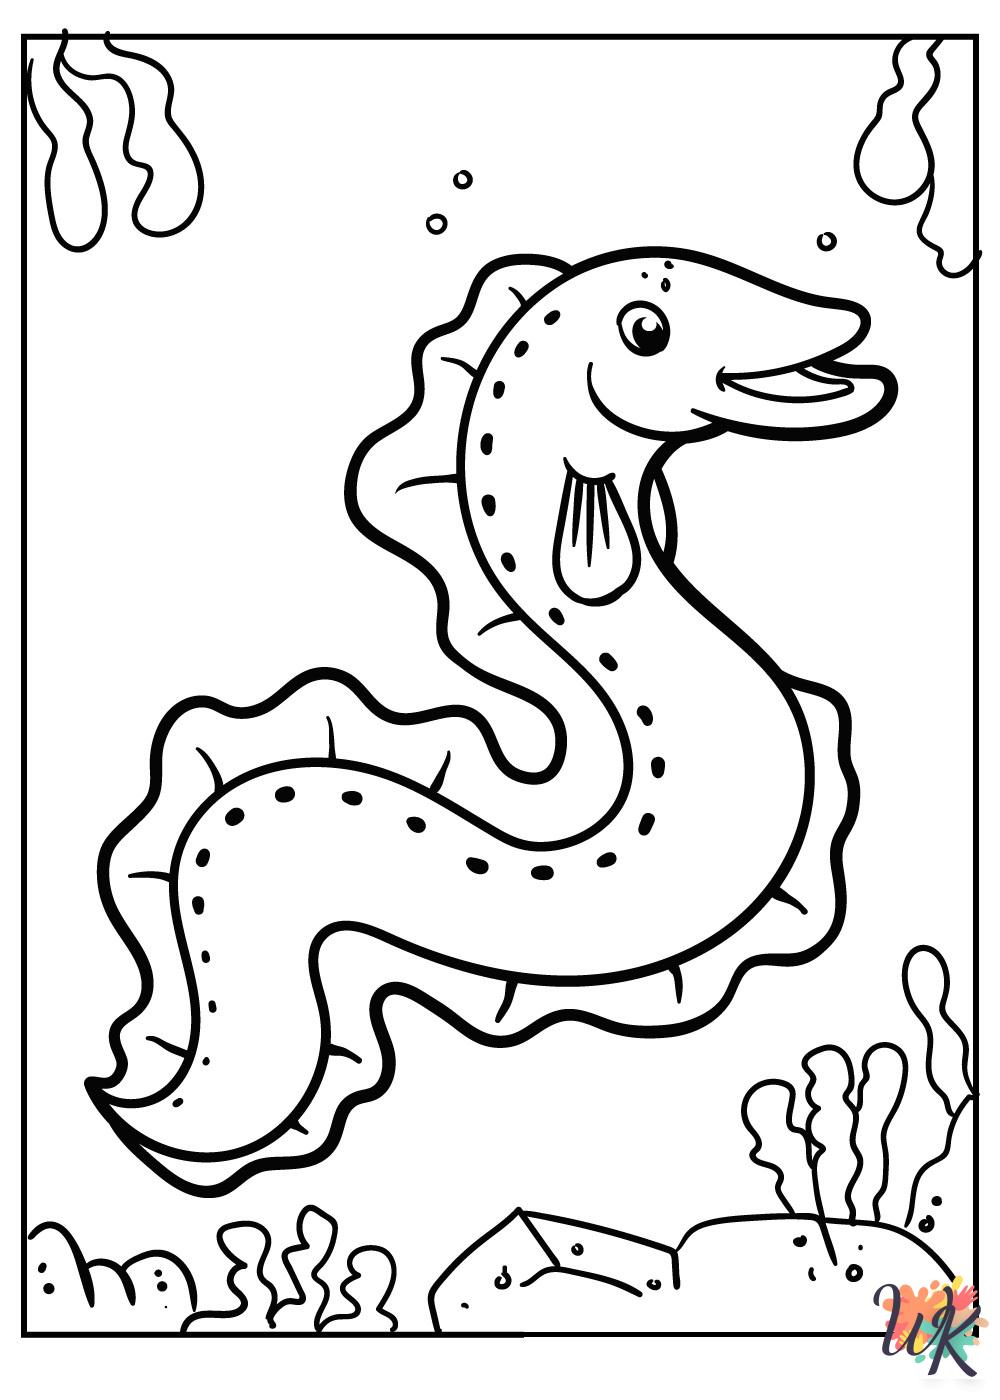 Under The Sea coloring pages free printable